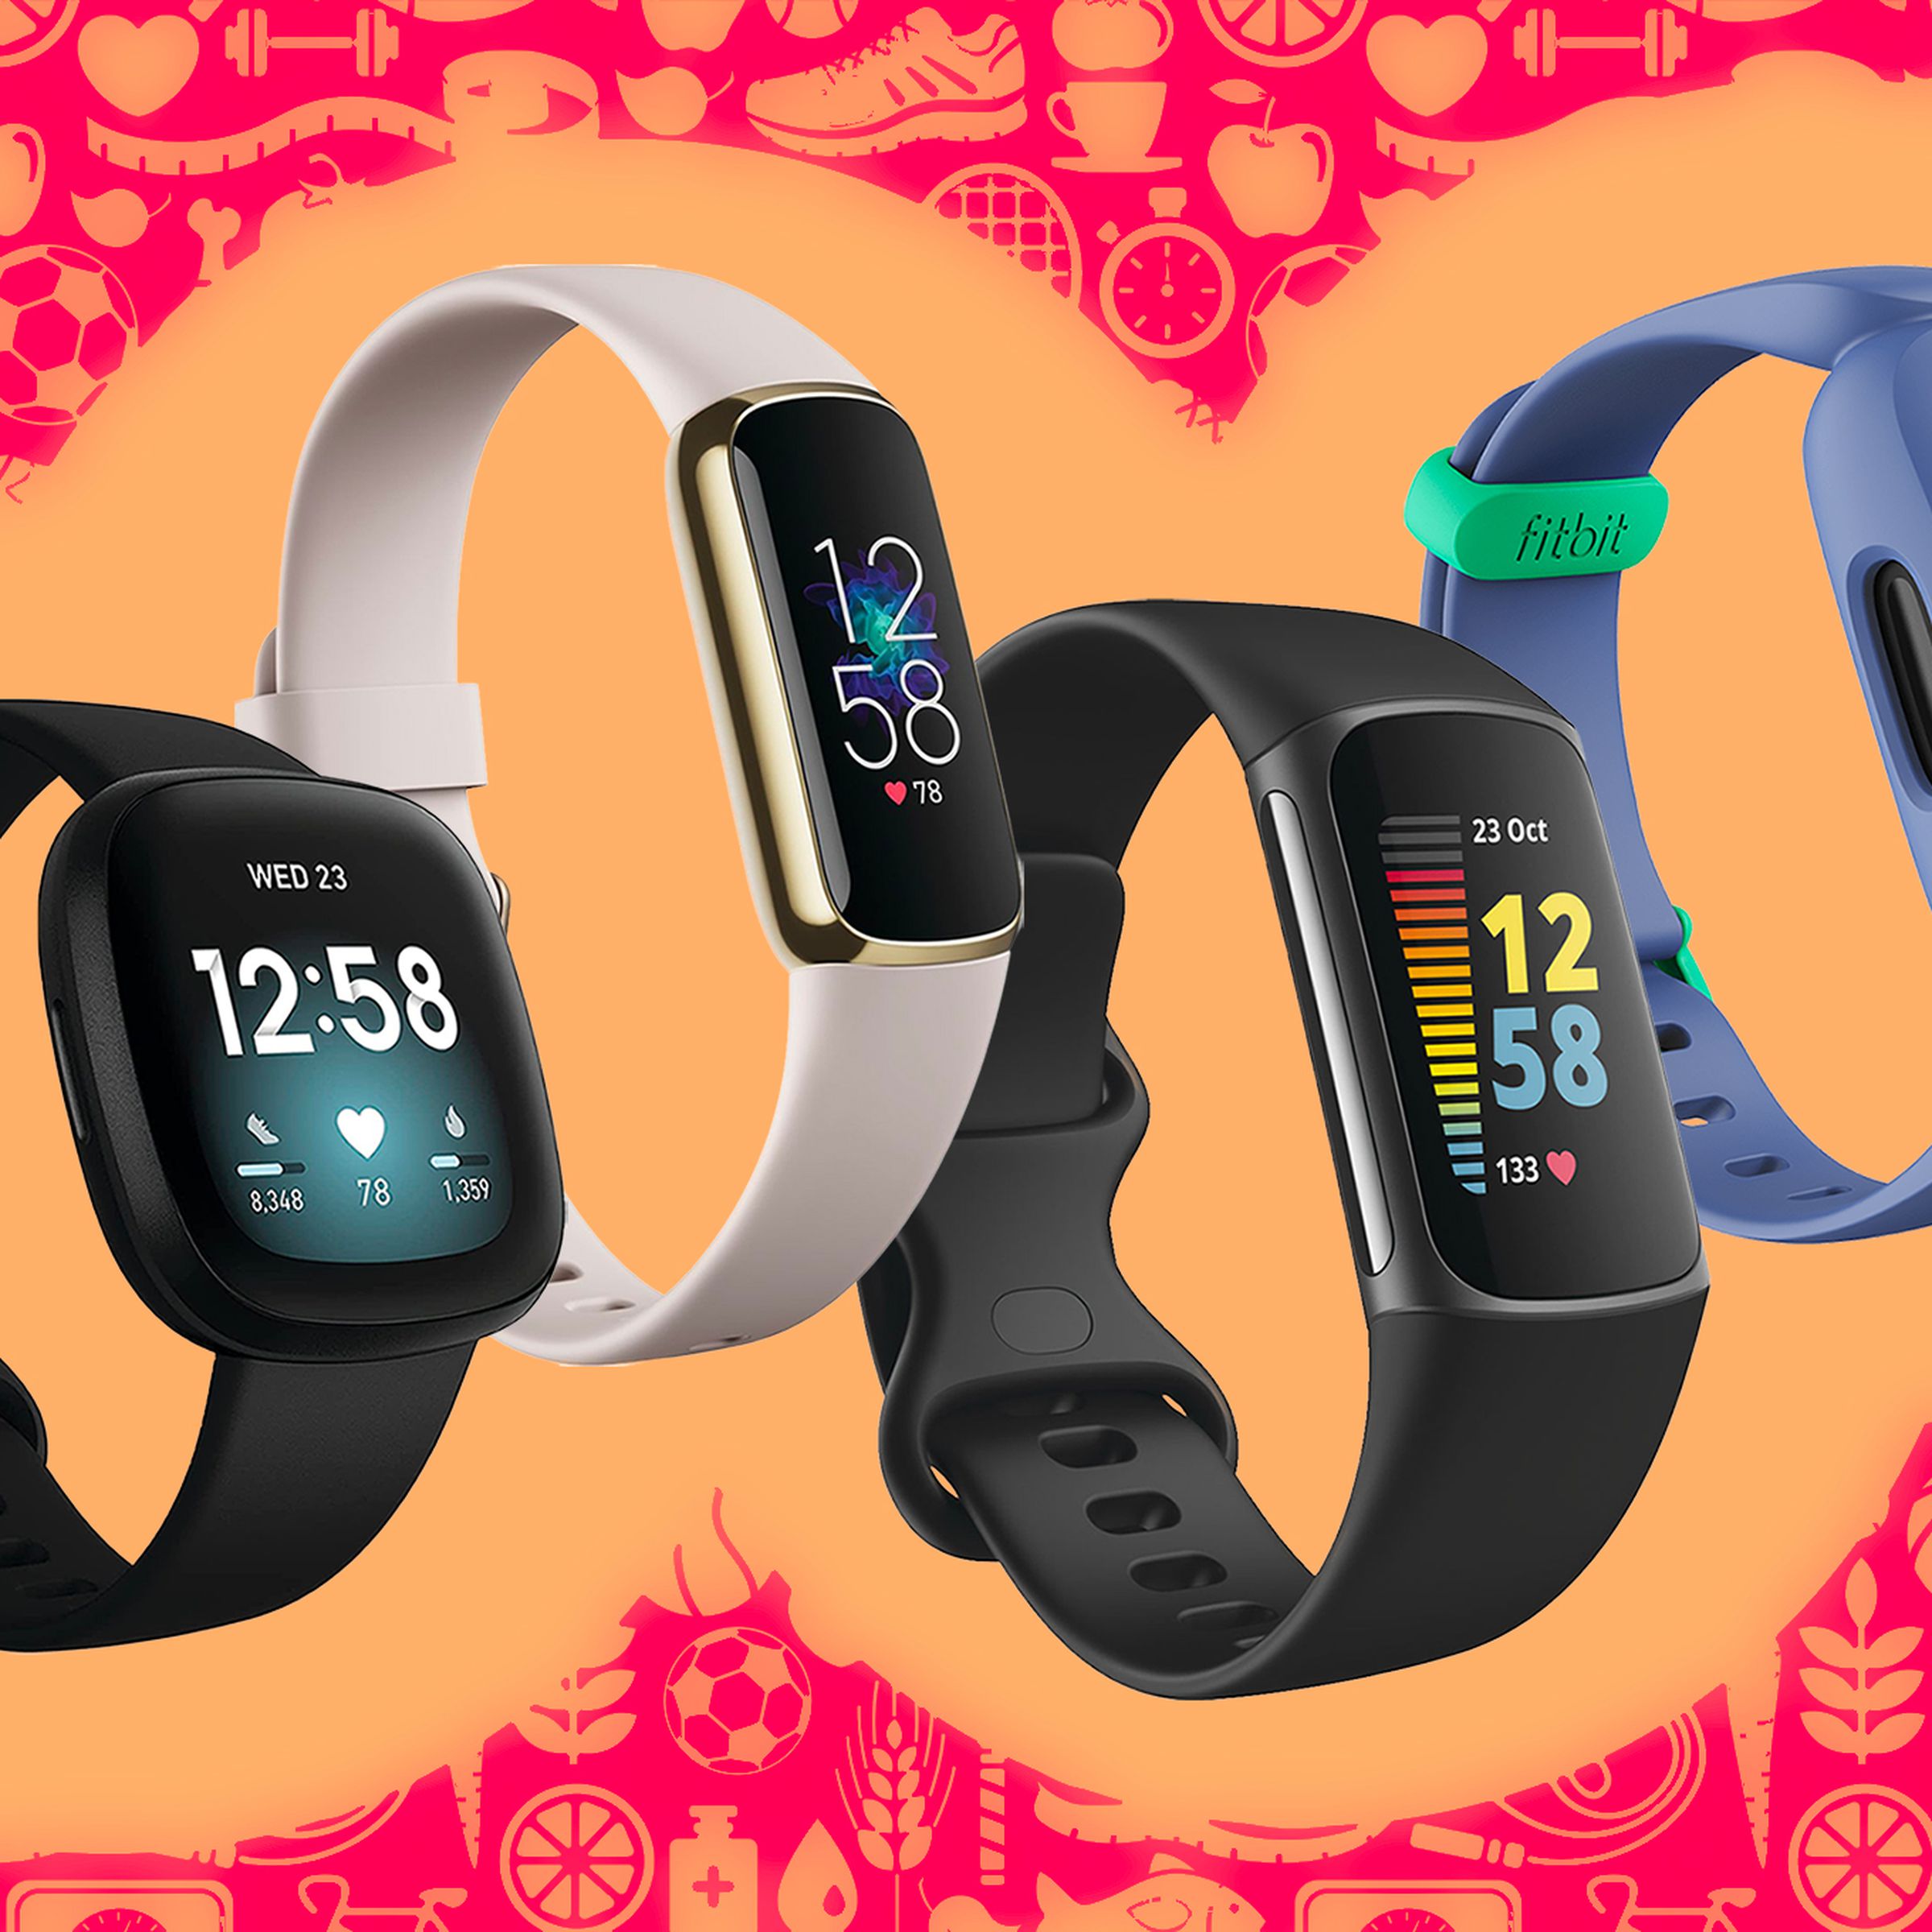 The Fitbit Versa, Fitbit Luxe, Fitbit Charge 5, and Fitbit Ace 3 fitness trackers, on an orange and red background.